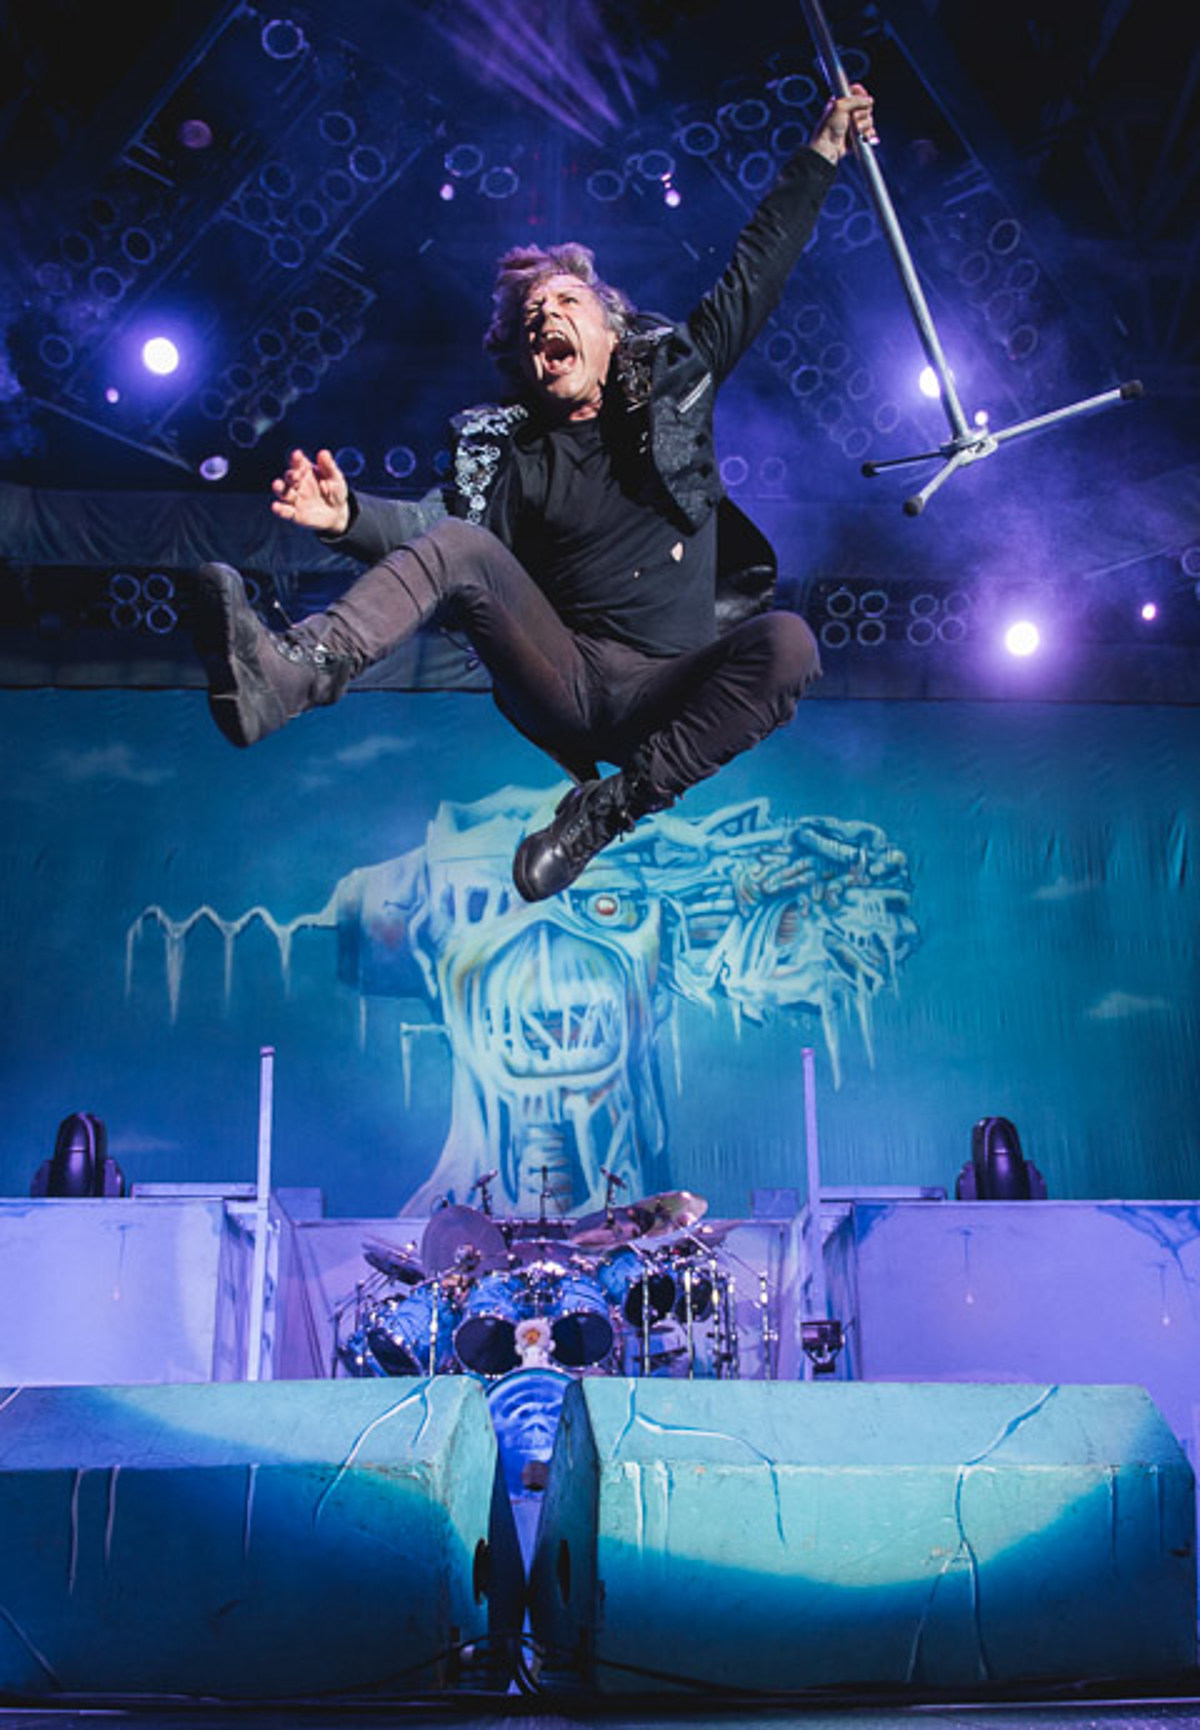 Iron Maiden came to the 360 Amphitheater (pics, setlist, review)